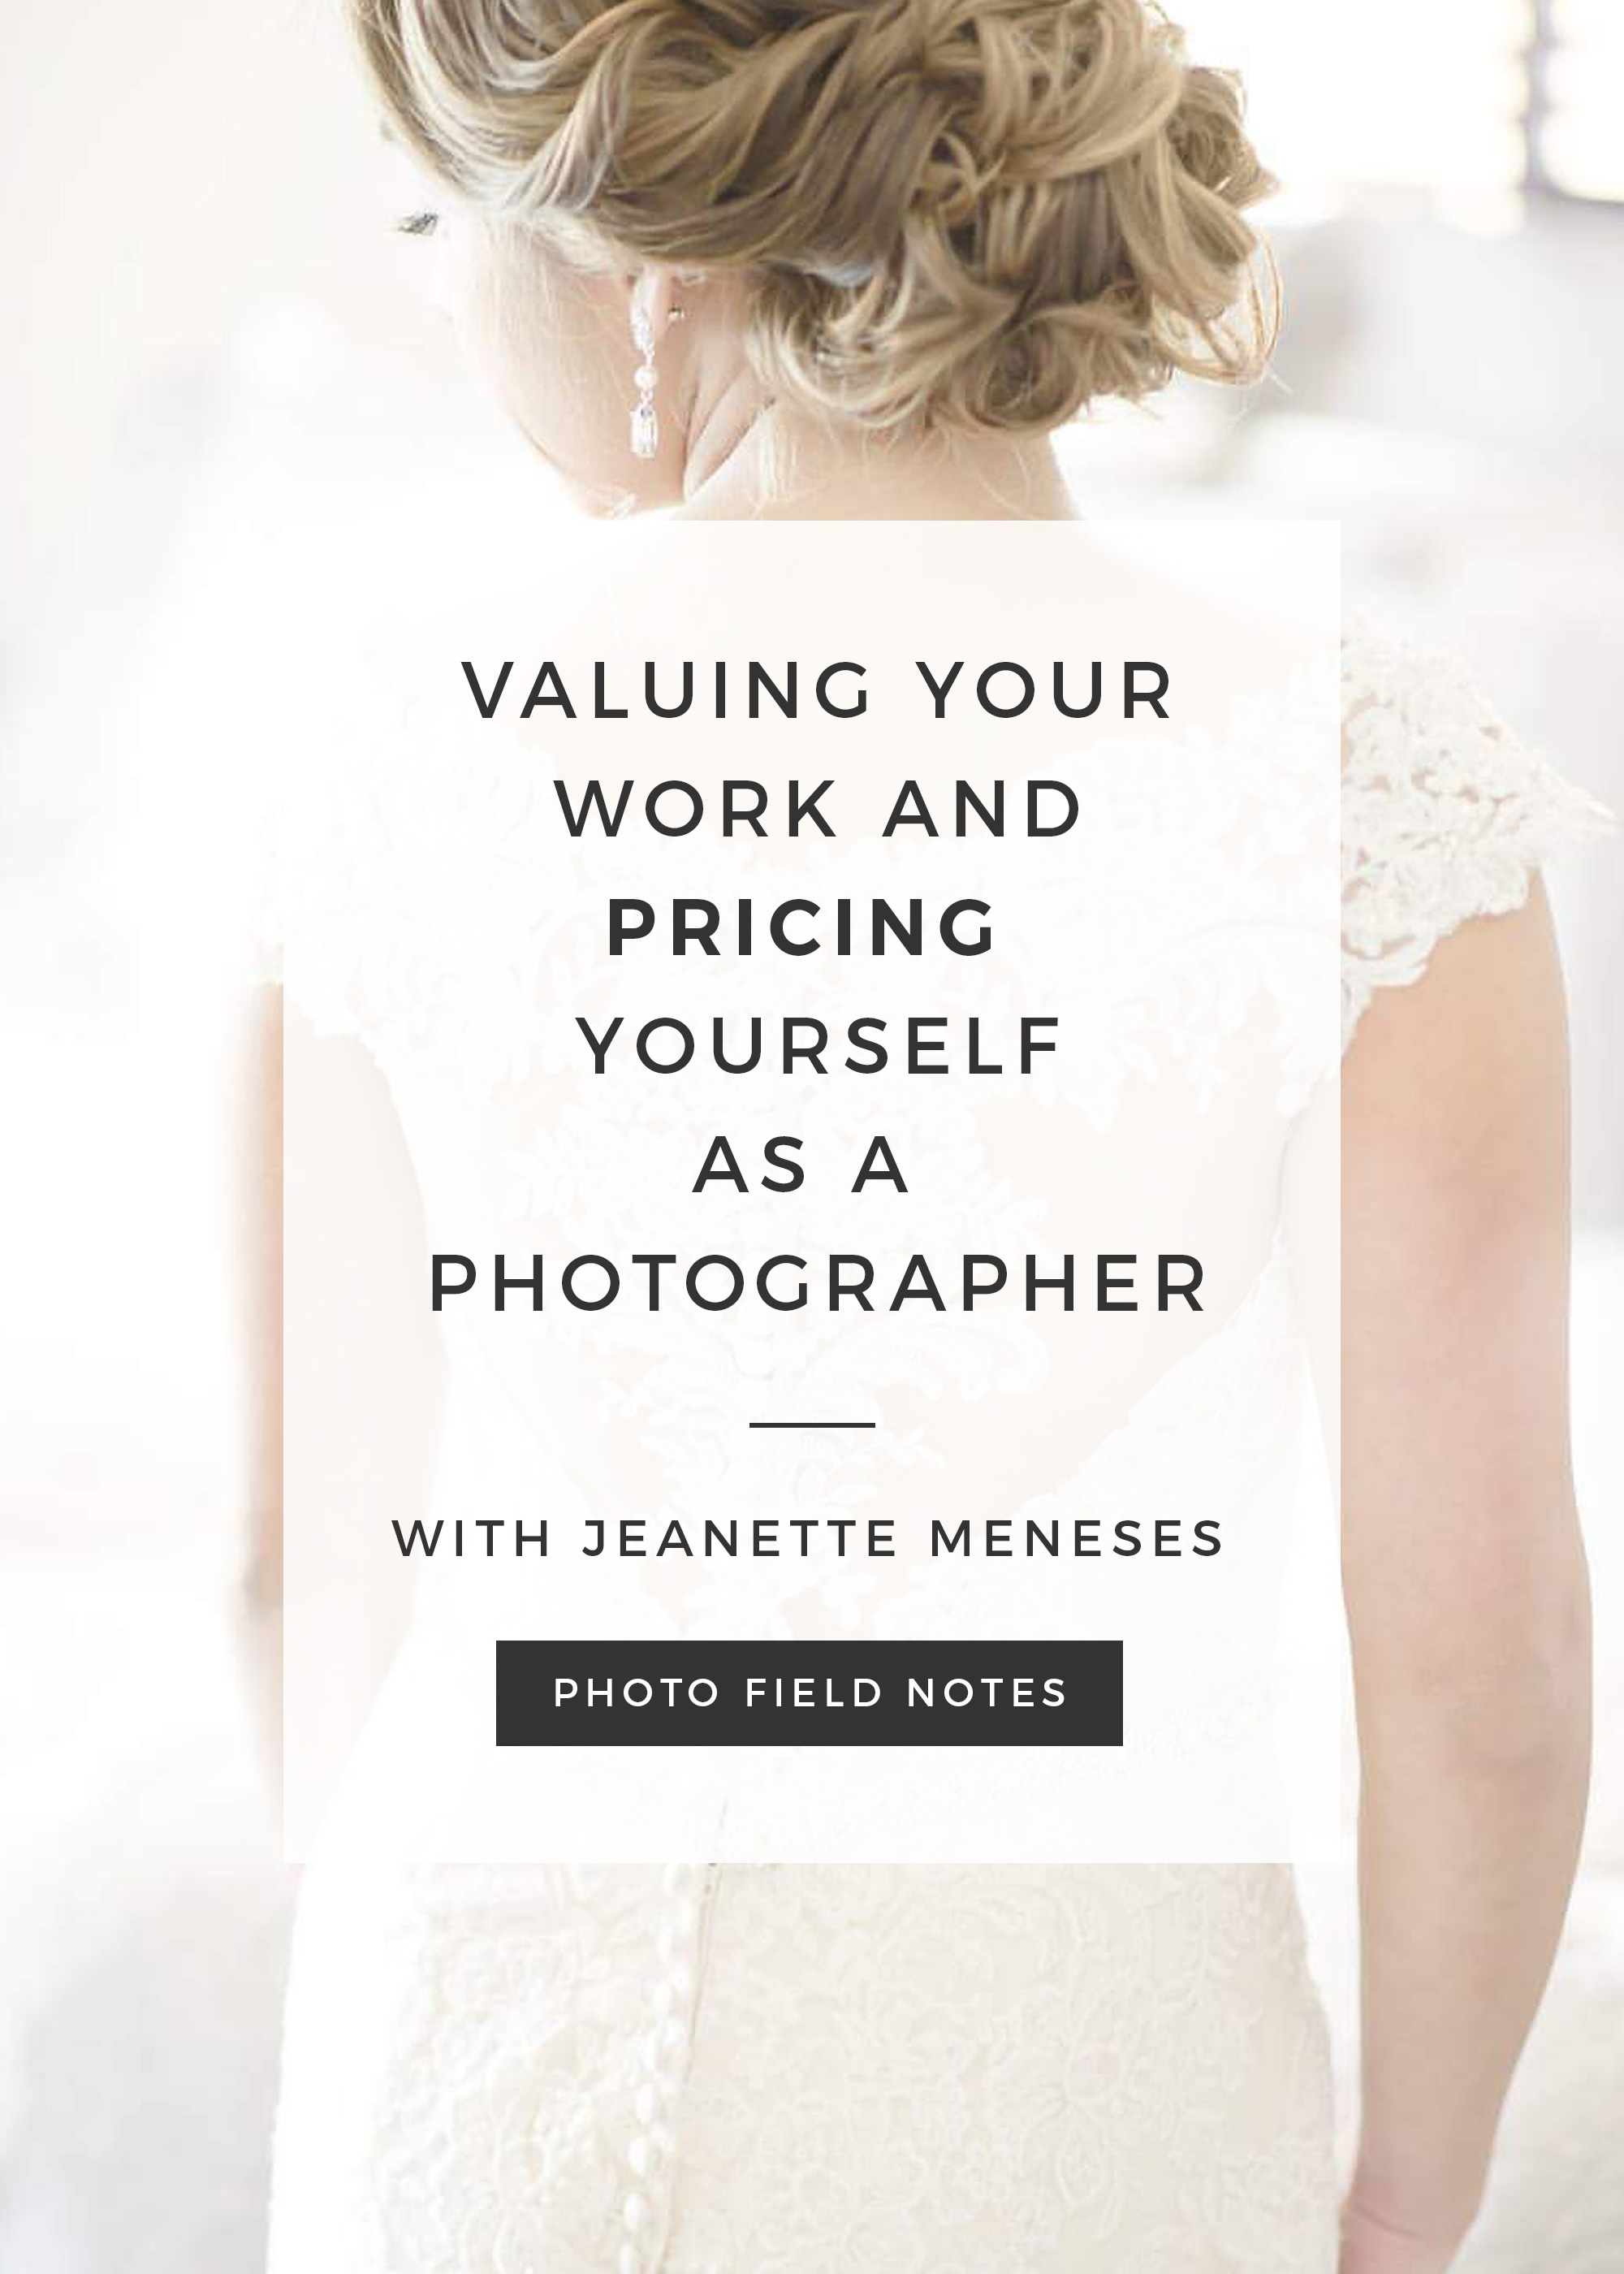 valuing your work and pricing yourself as a photographer (how to price yourself)